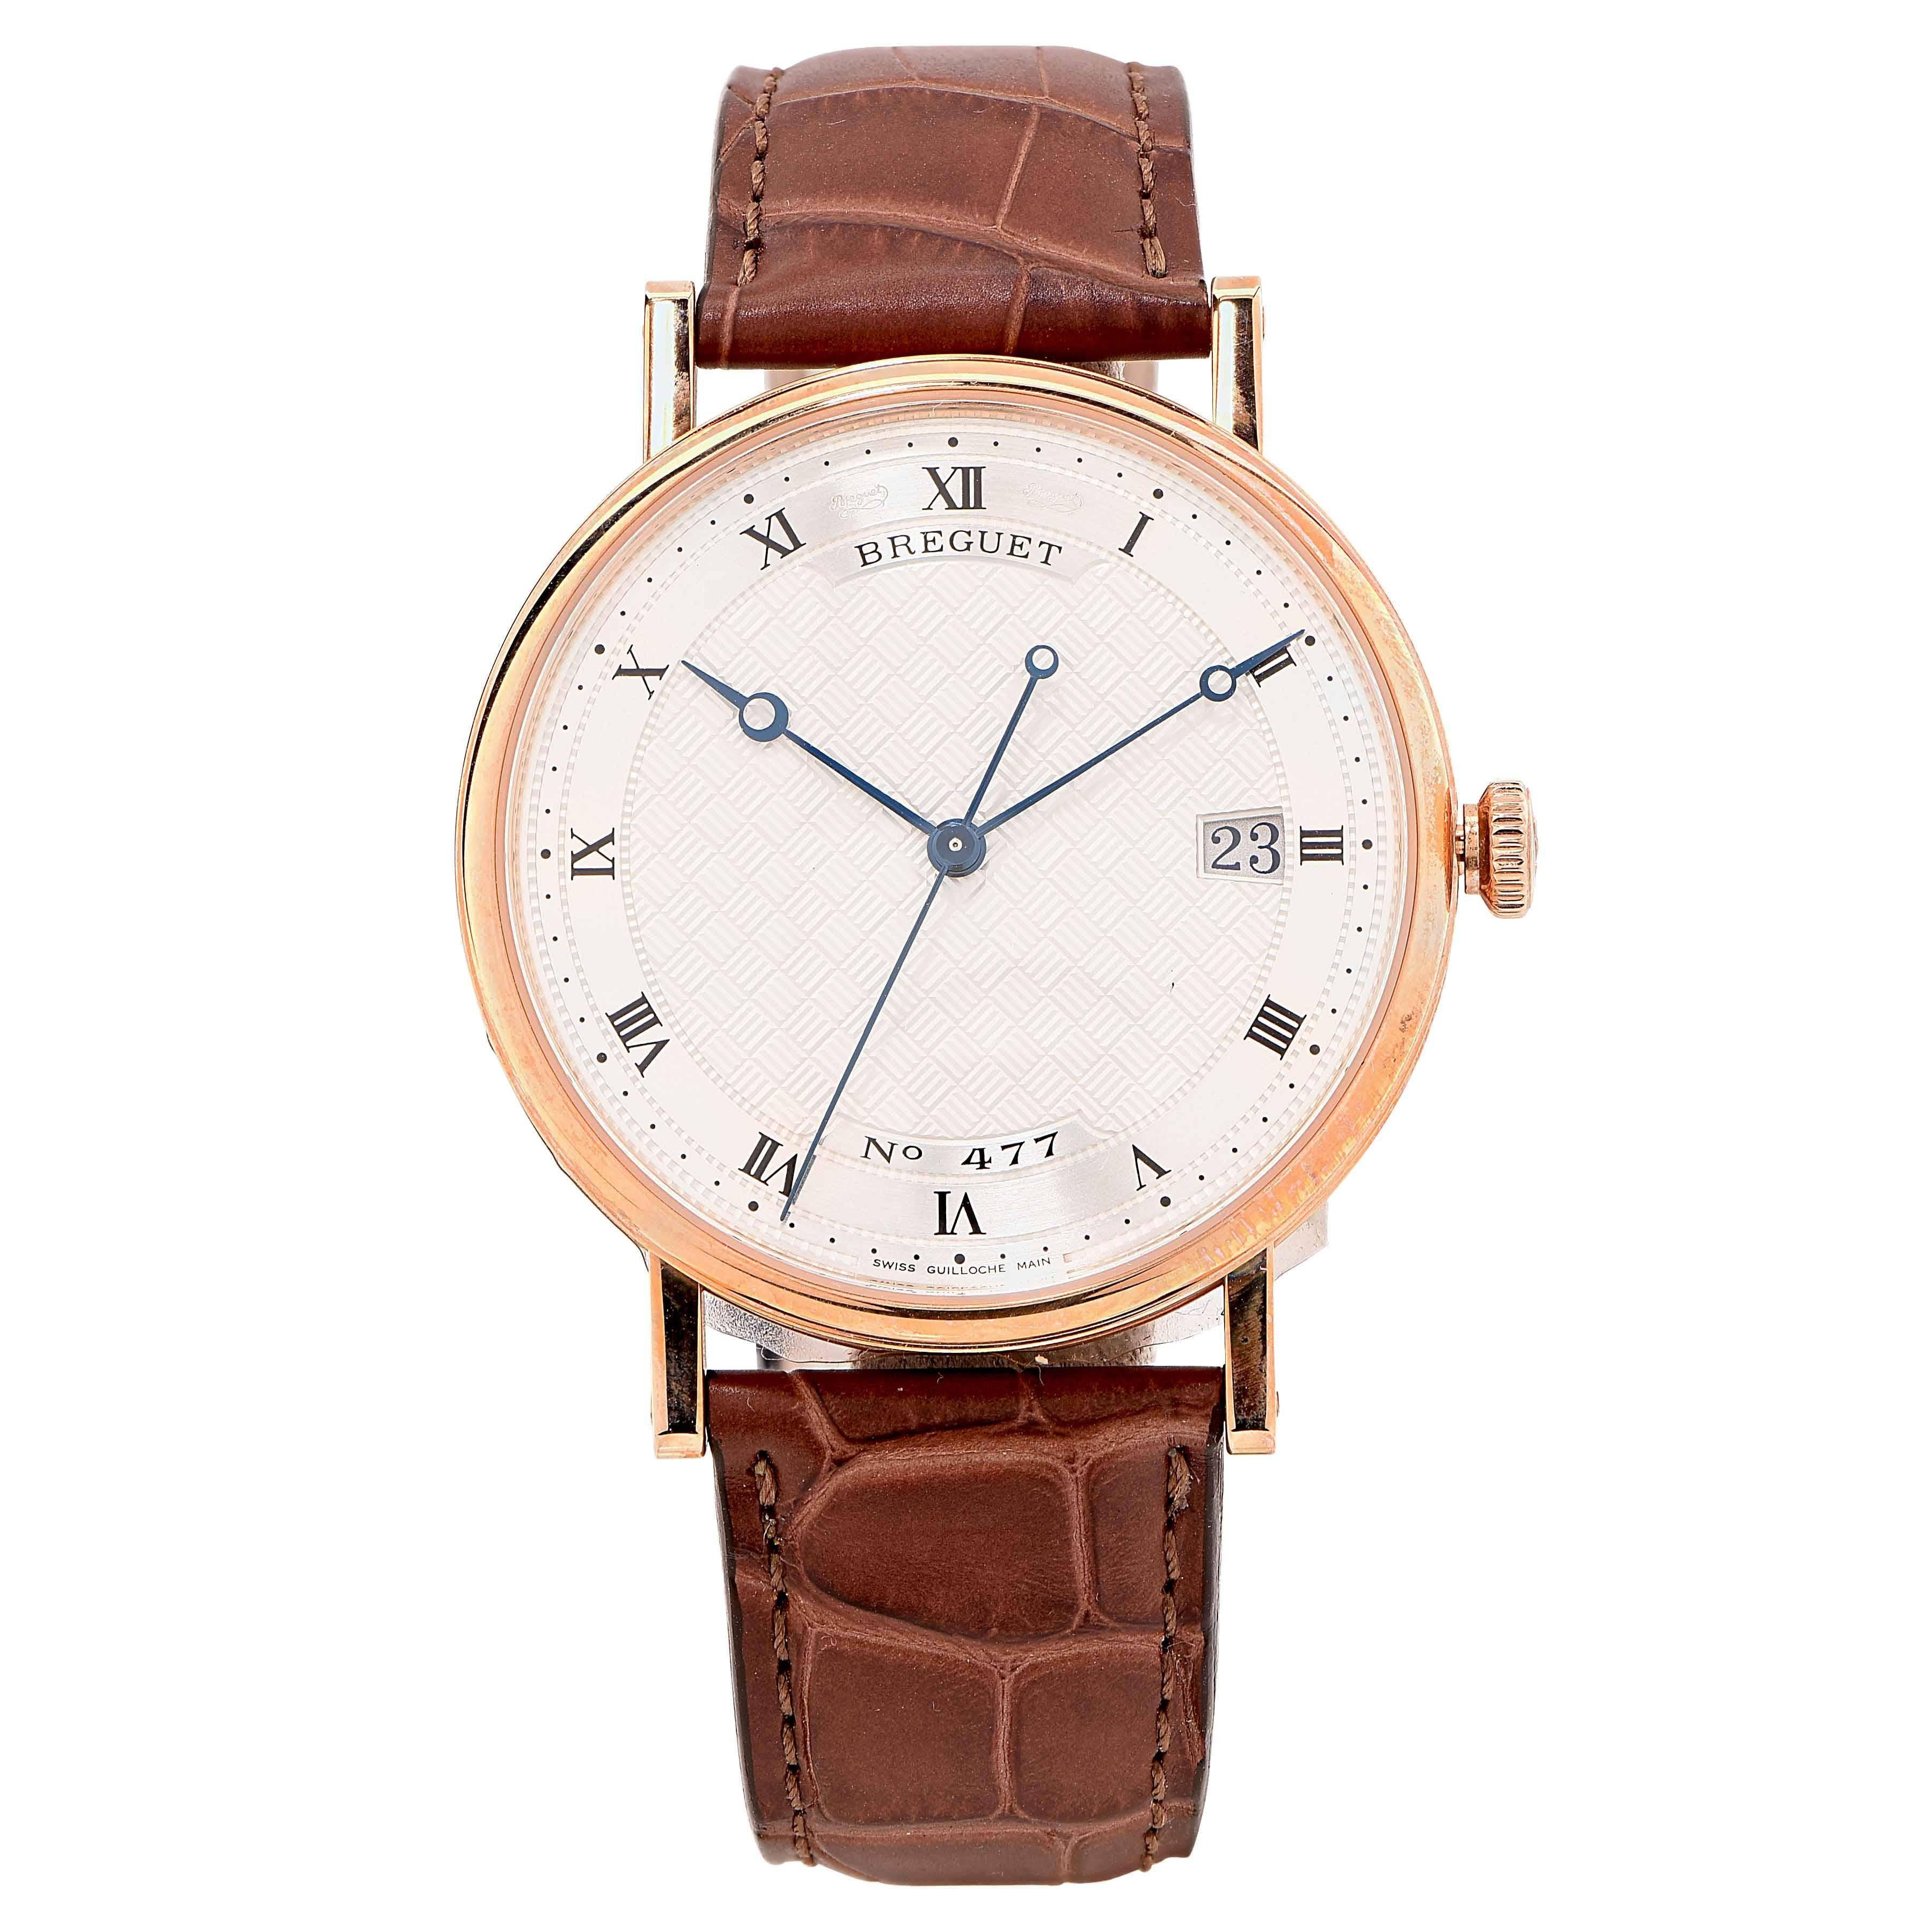 Brand new Breguet classique mens automatic watch in rose gold.

Model #5177BR129V6 Retail $23,200. Box and papers.

Classique wristwatch in 18-carat rose gold. Self-winding movement with date. Balance spring, lever and escape wheel in silicon.